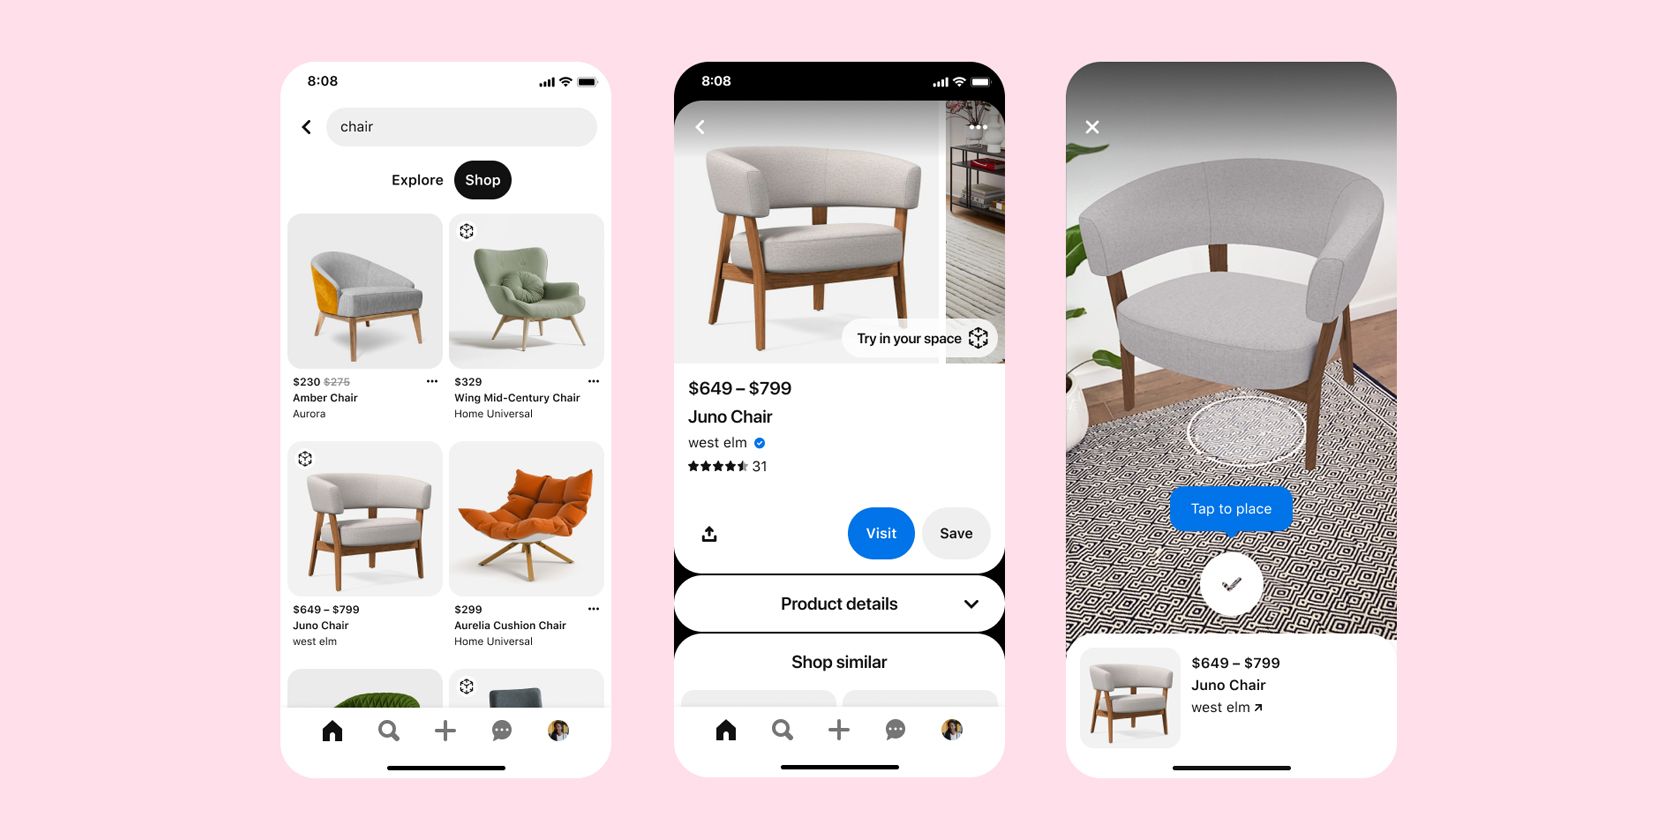 How to Use Pinterest's New Augmented Reality Feature